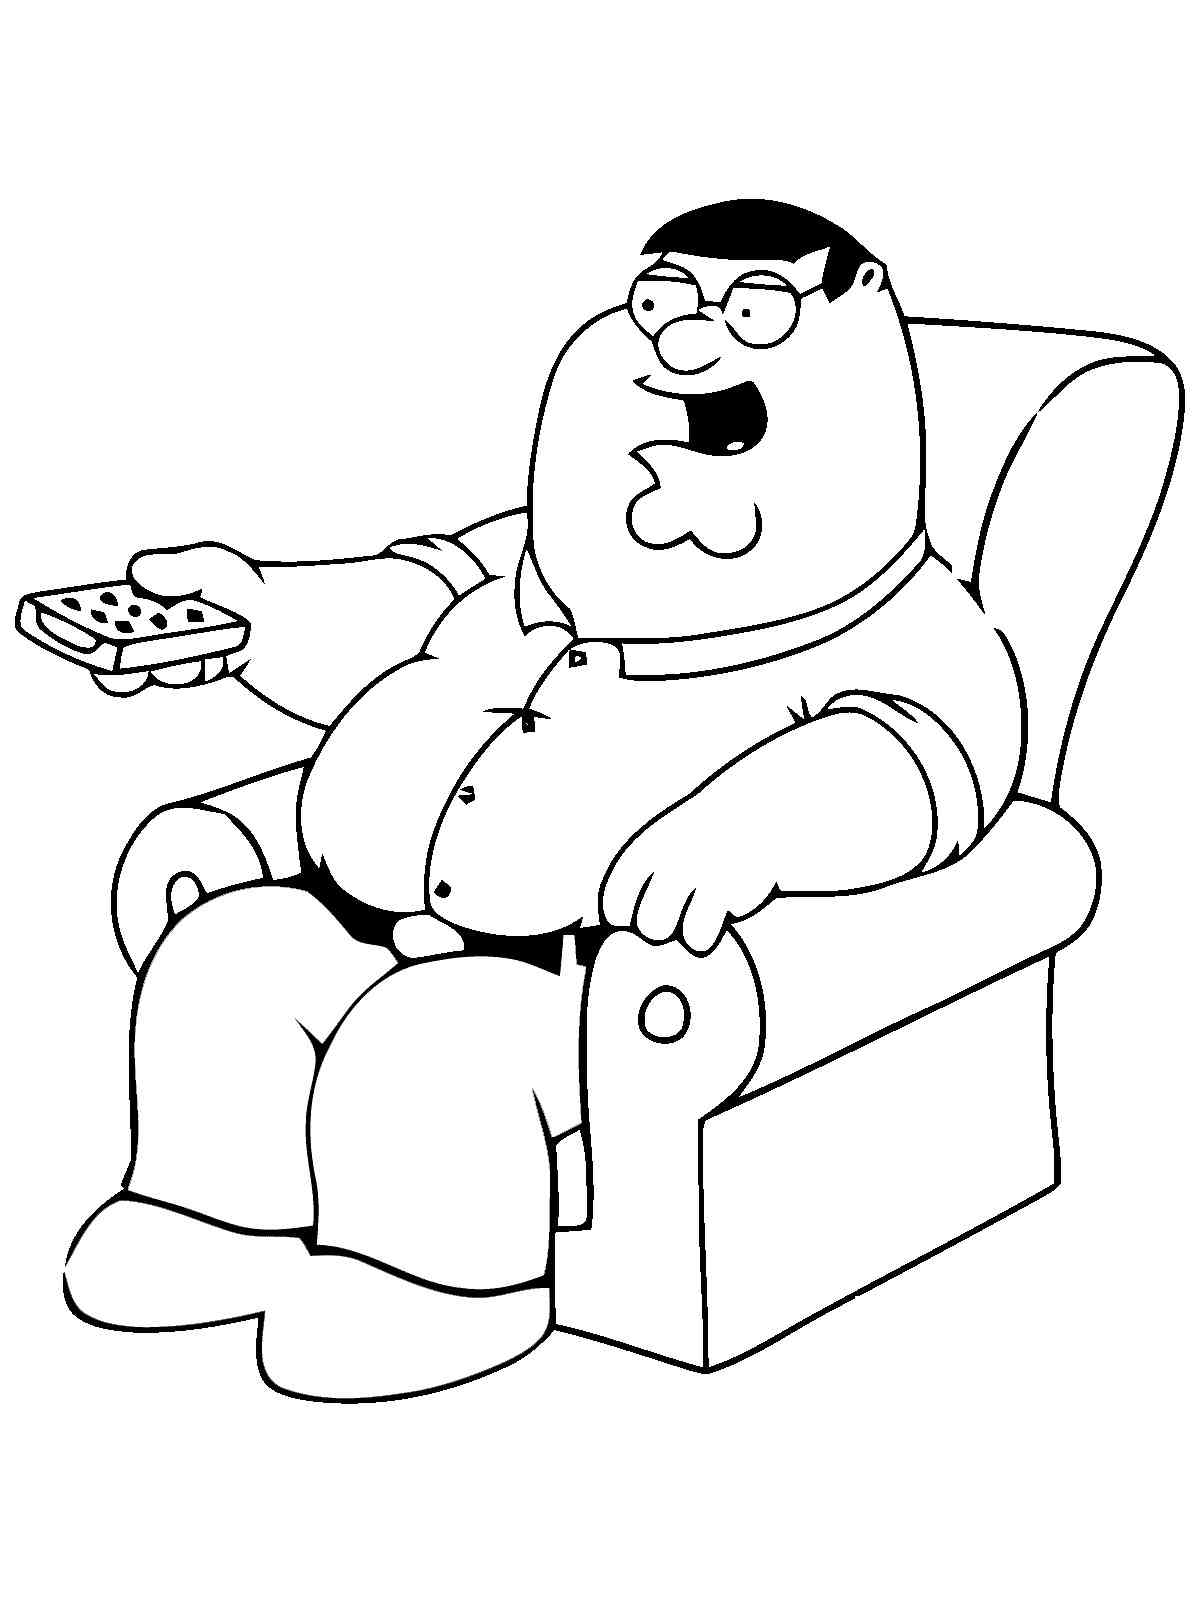 Family Guy 3 coloring page